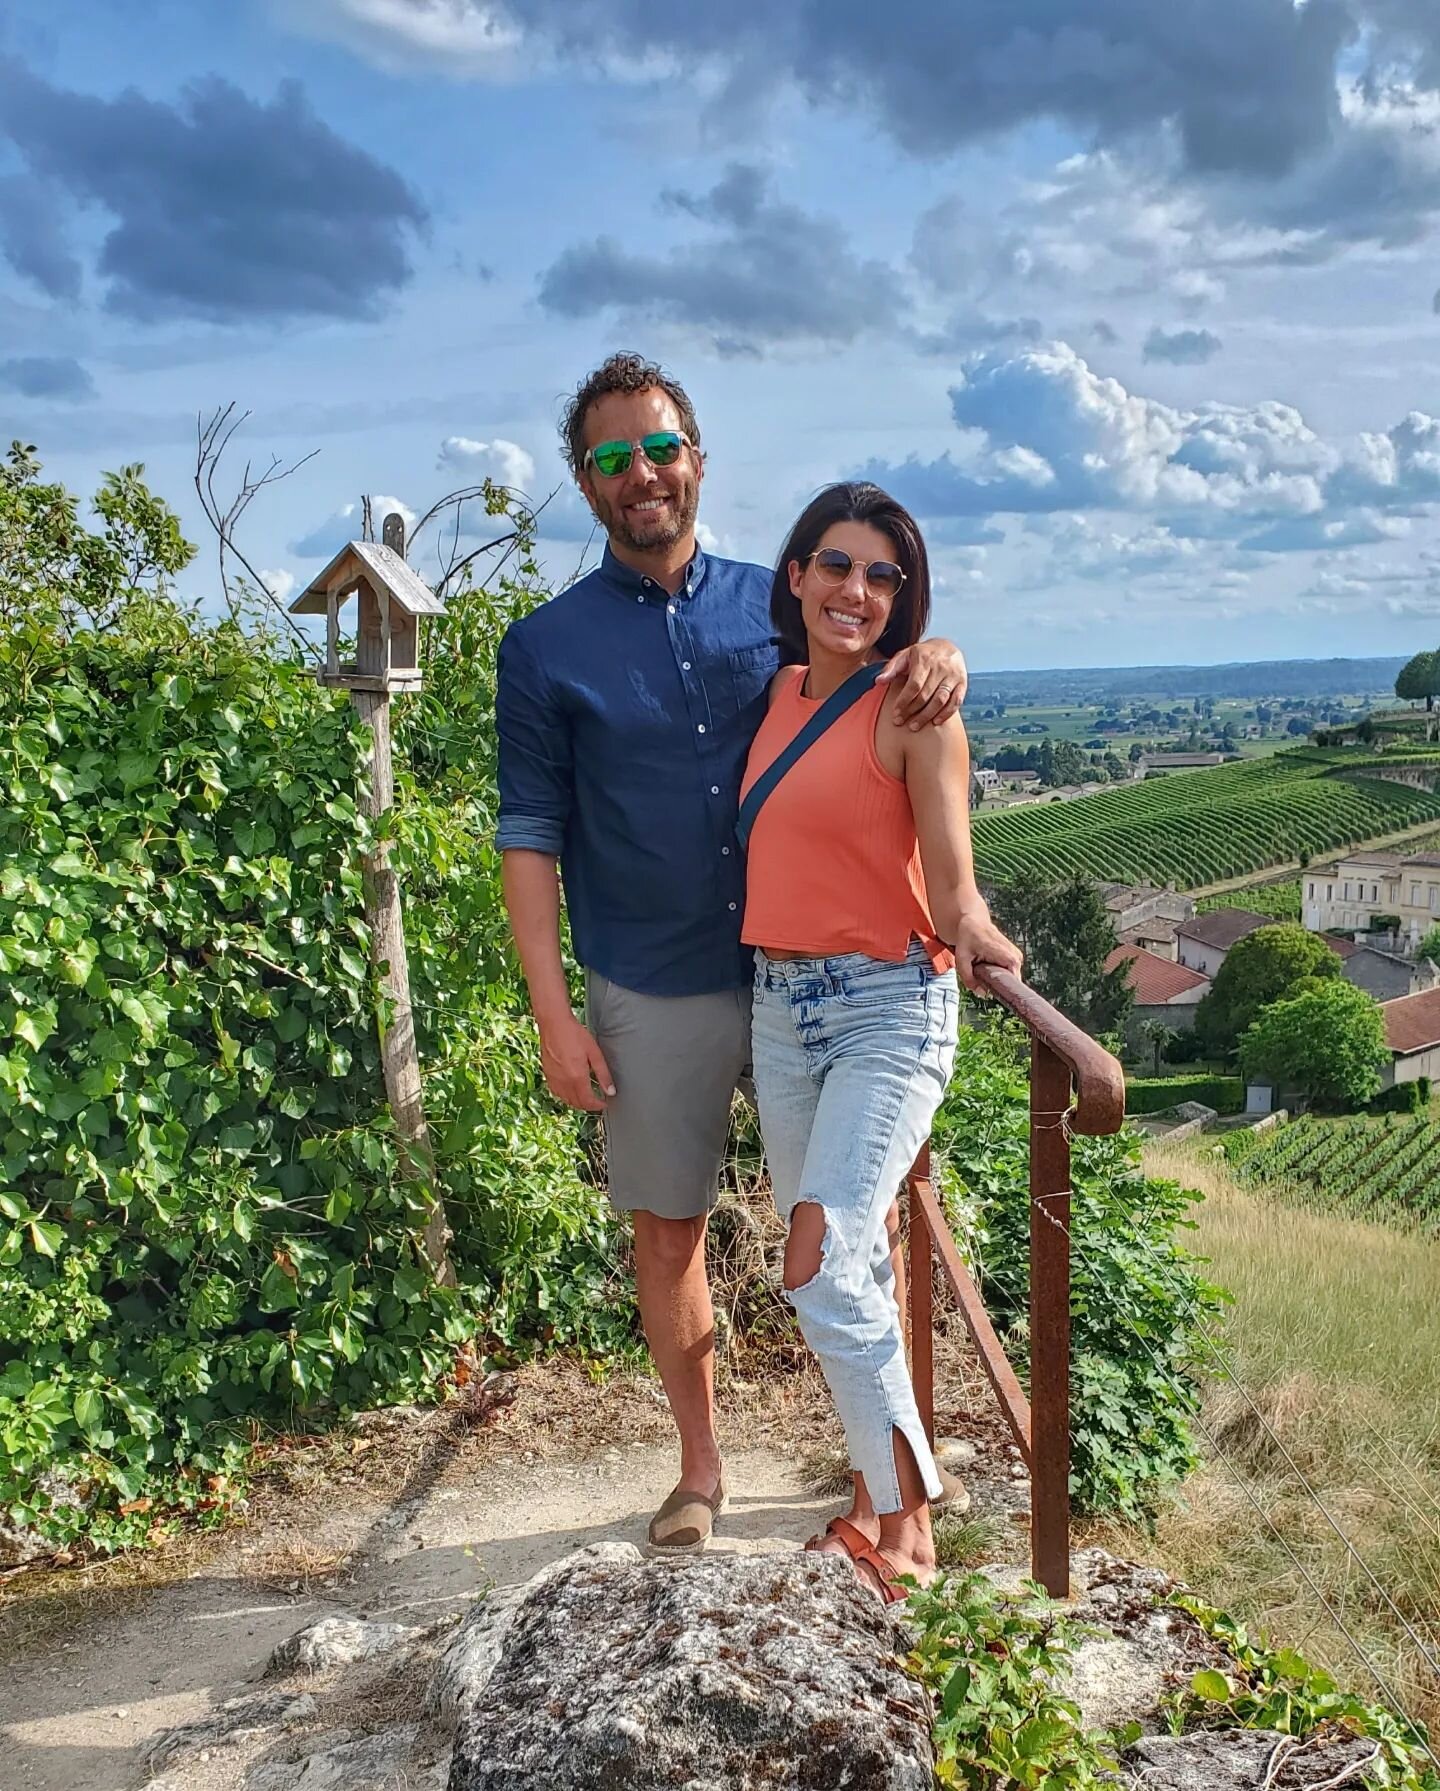 St Emilion &amp; Bordeaux region had me reminiscing about everything I learned in my college 'Wines &amp; Spirits' course (20 yrs ago)! 🍷 About halfway from Biarritz we jumped off the tollway and took tiny roads through quaint villages and towns, th